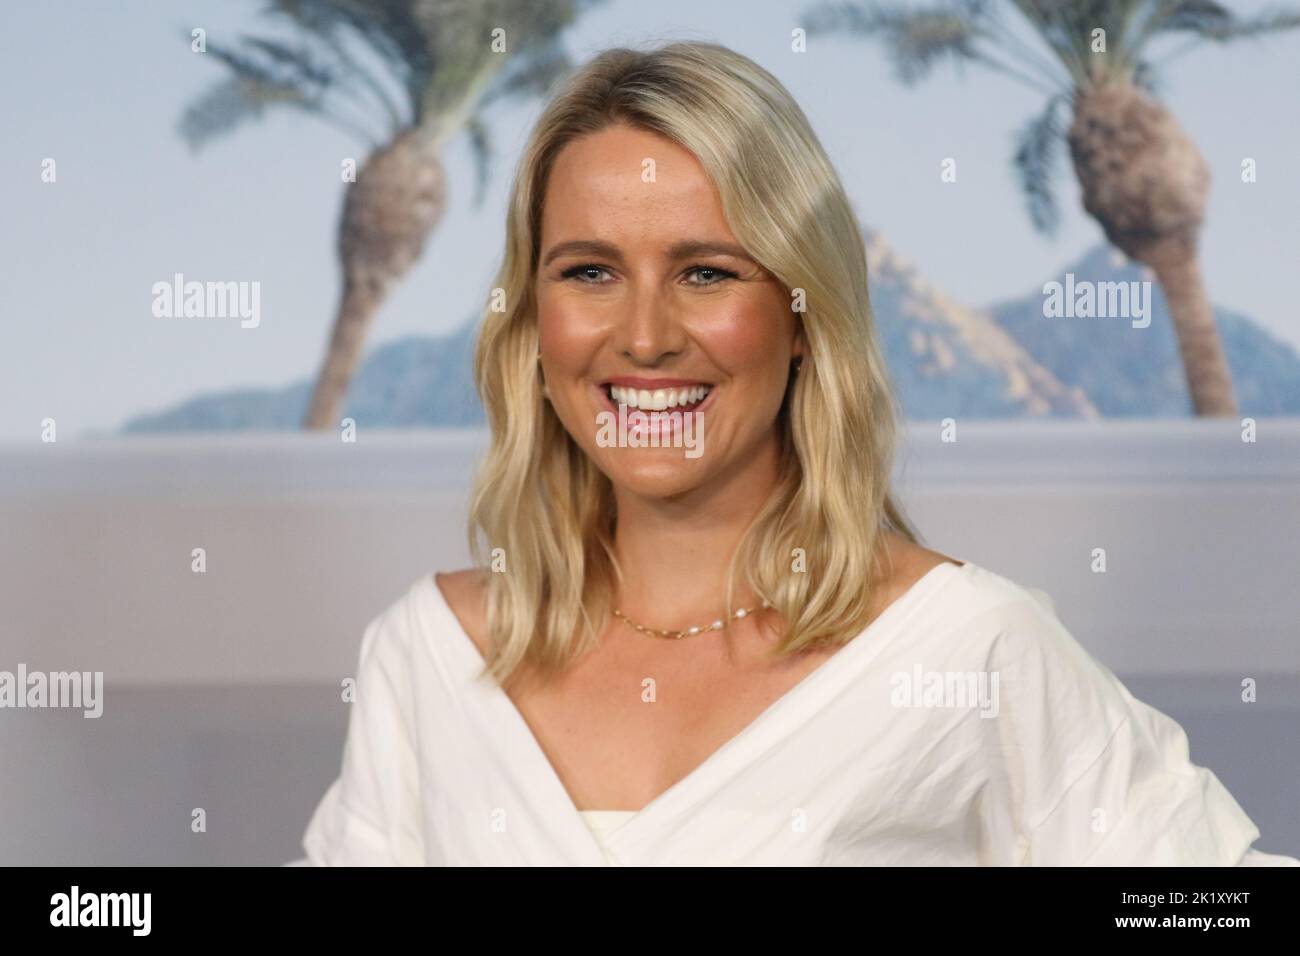 Sydney, Australia. 21st September 2022. Candice Dixon  arrives on the red carpet for the Sydney Premiere of Don’t Worry Darling at Event Cinemas, George Street. Credit: Richard Milnes/Alamy Live News Stock Photo